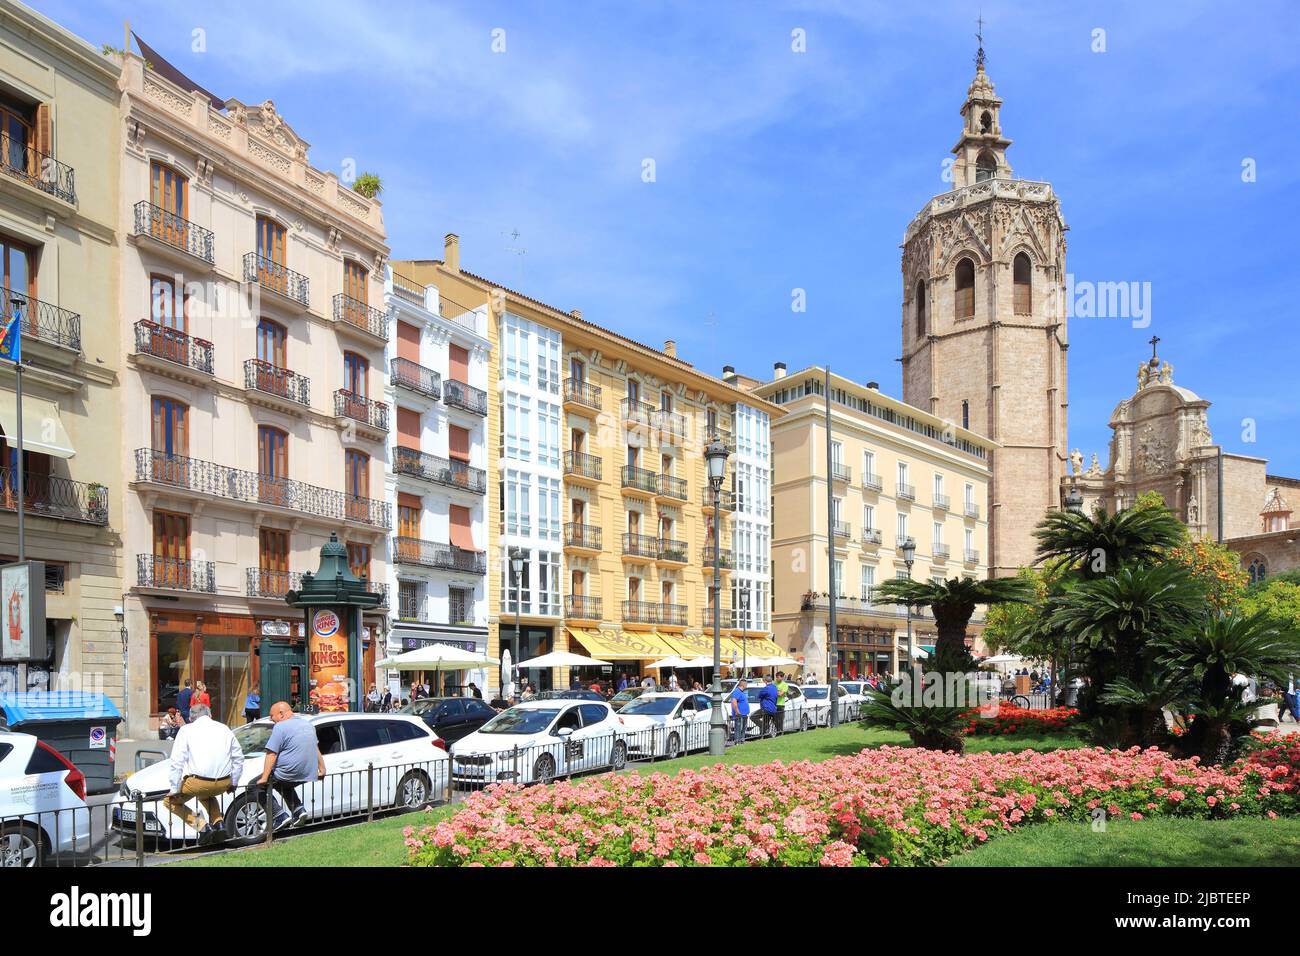 Spain, Valencia, Plaza de la Reina, facades of buildings with in the background the bell tower of the Cathedral (Micalet) of Gothic style (1381-1424) surmounted by an 18th century campanile Stock Photo